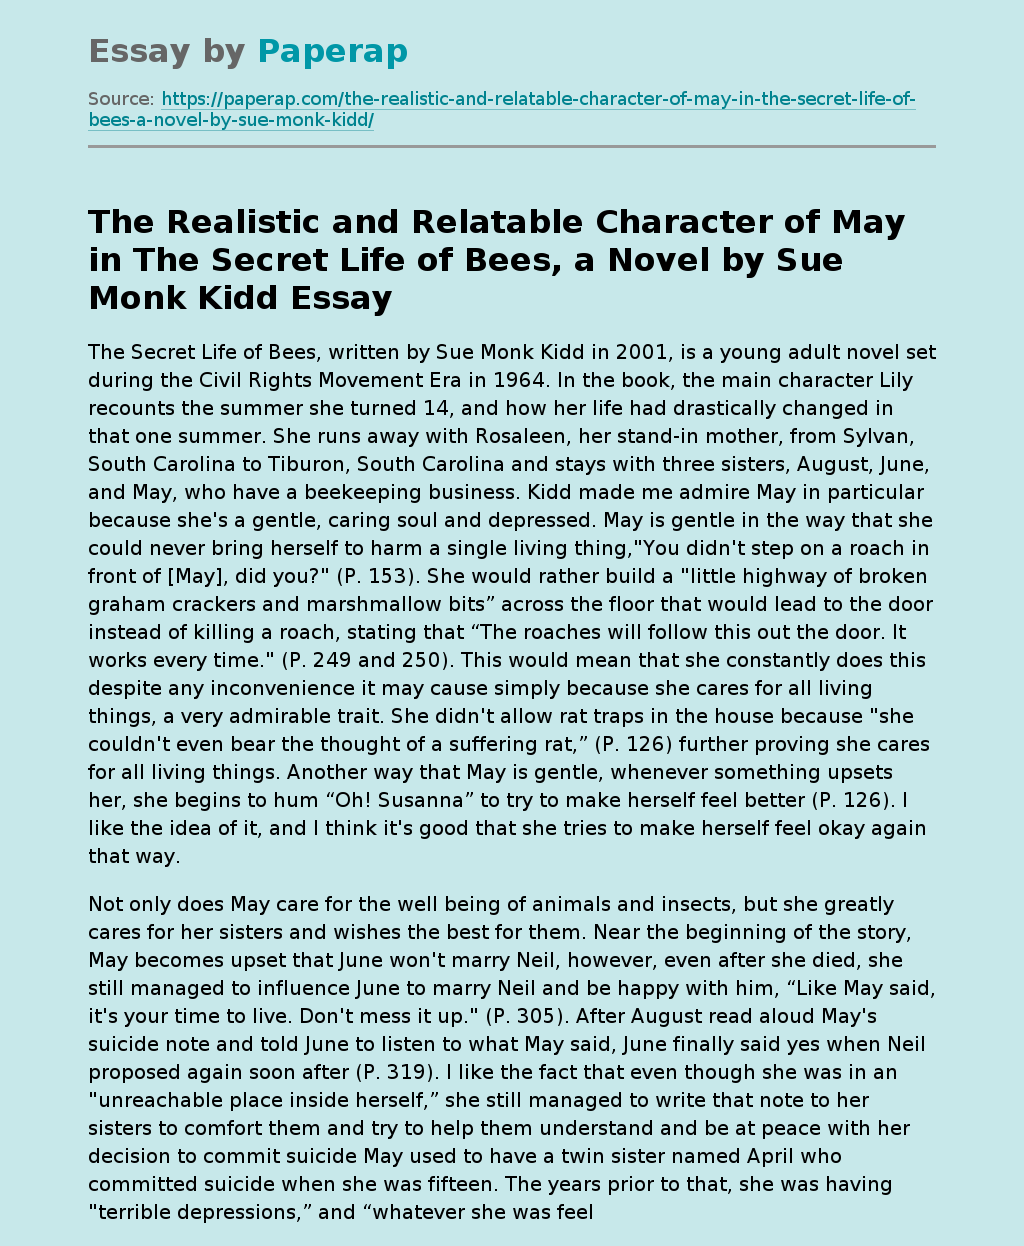 The Realistic and Relatable Character of May in The Secret Life of Bees, a Novel by Sue Monk Kidd